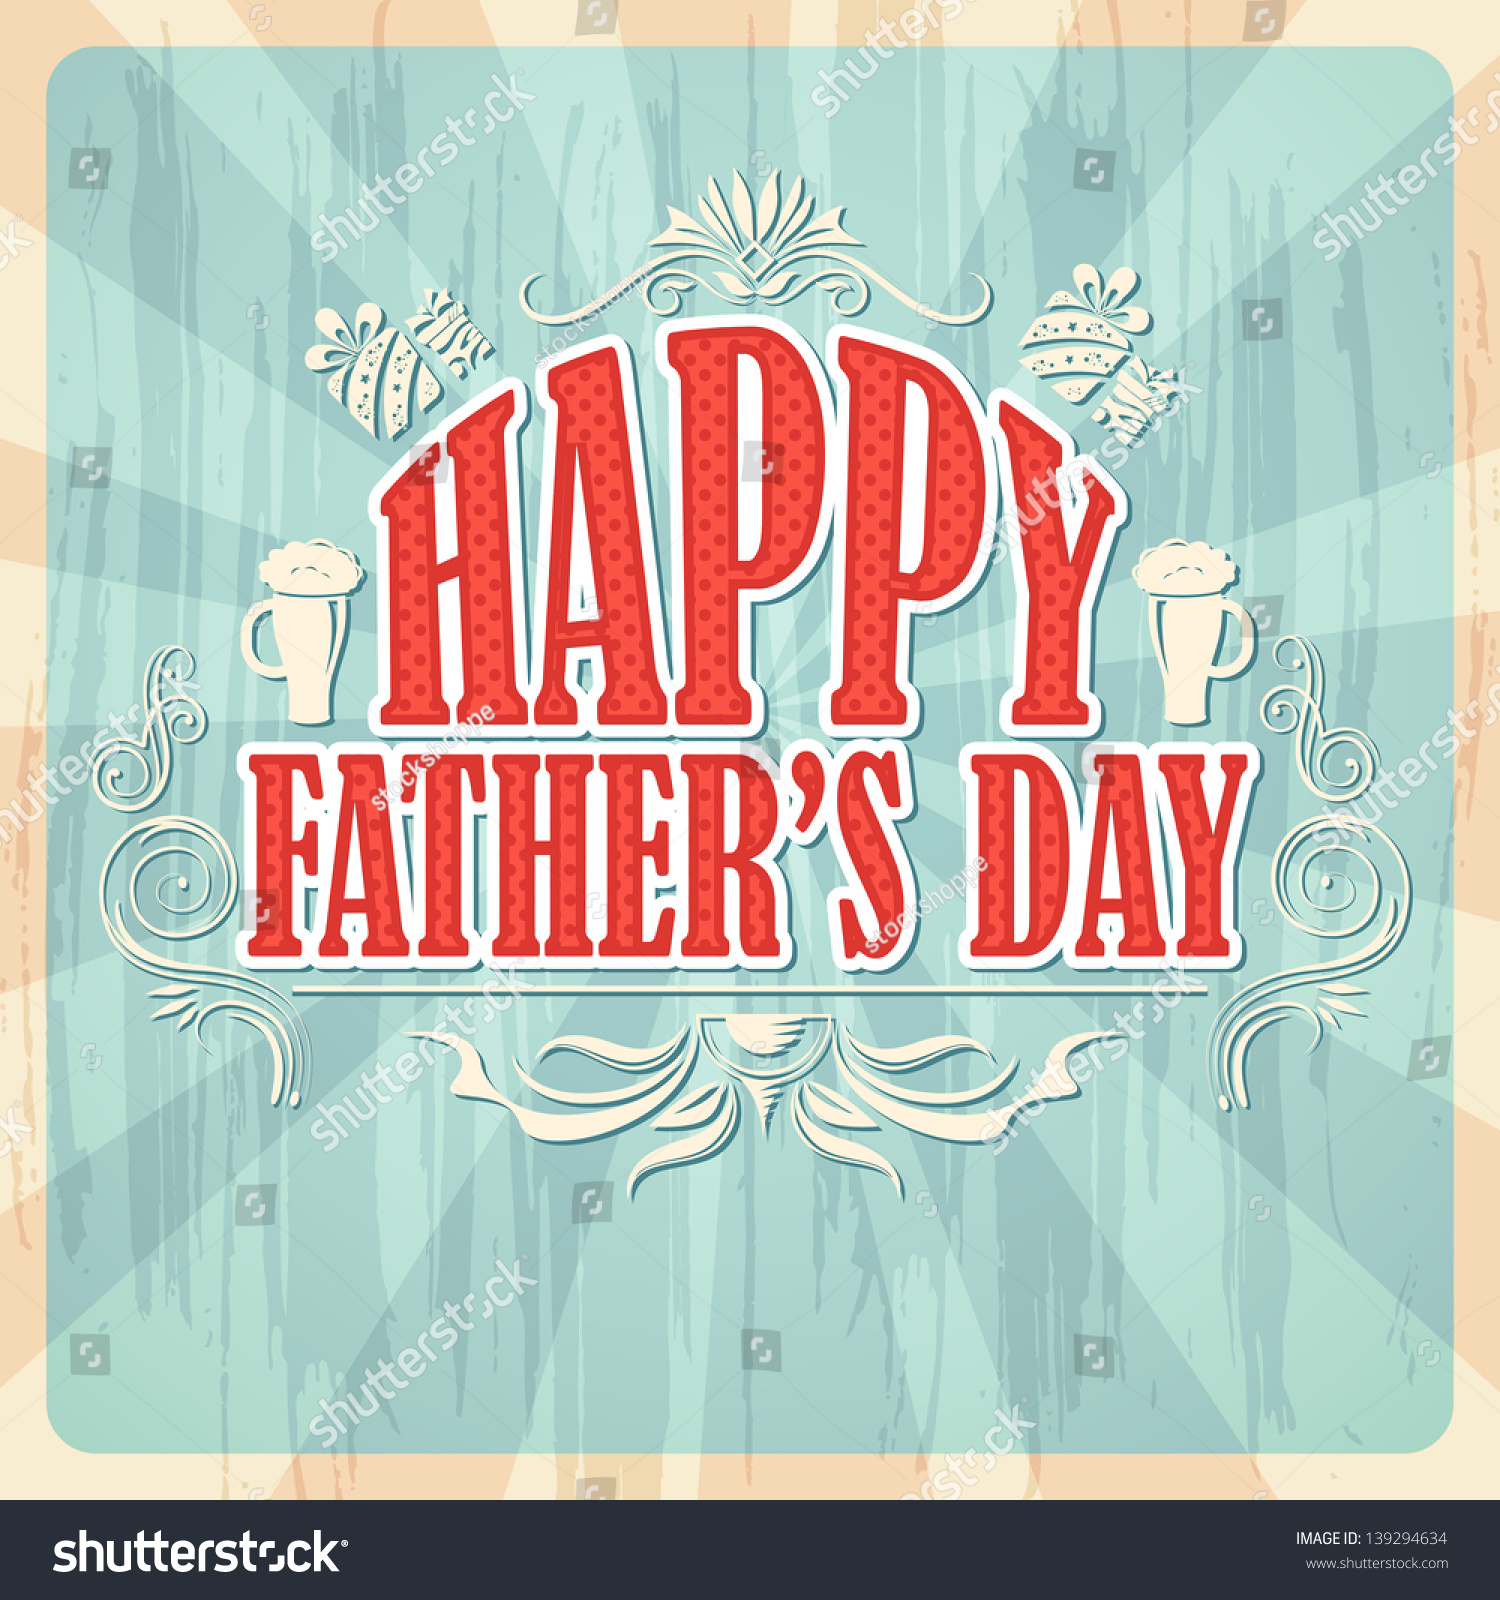 Vector Illustration Of Happy Father'S Day Background - 139294634